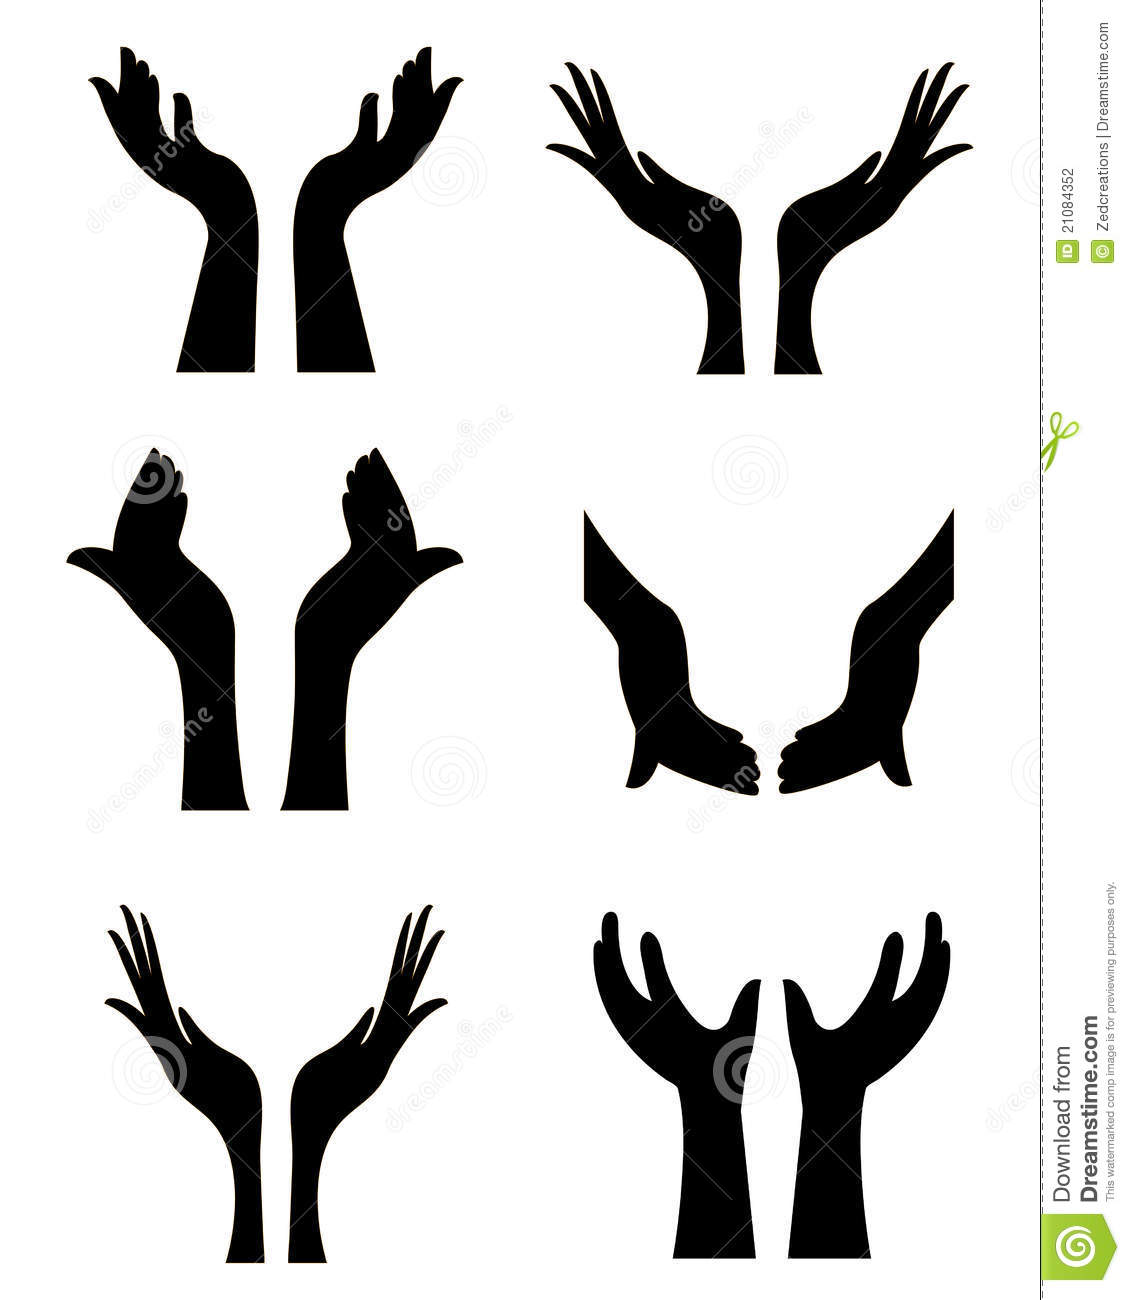 massages clipart hand silhouette